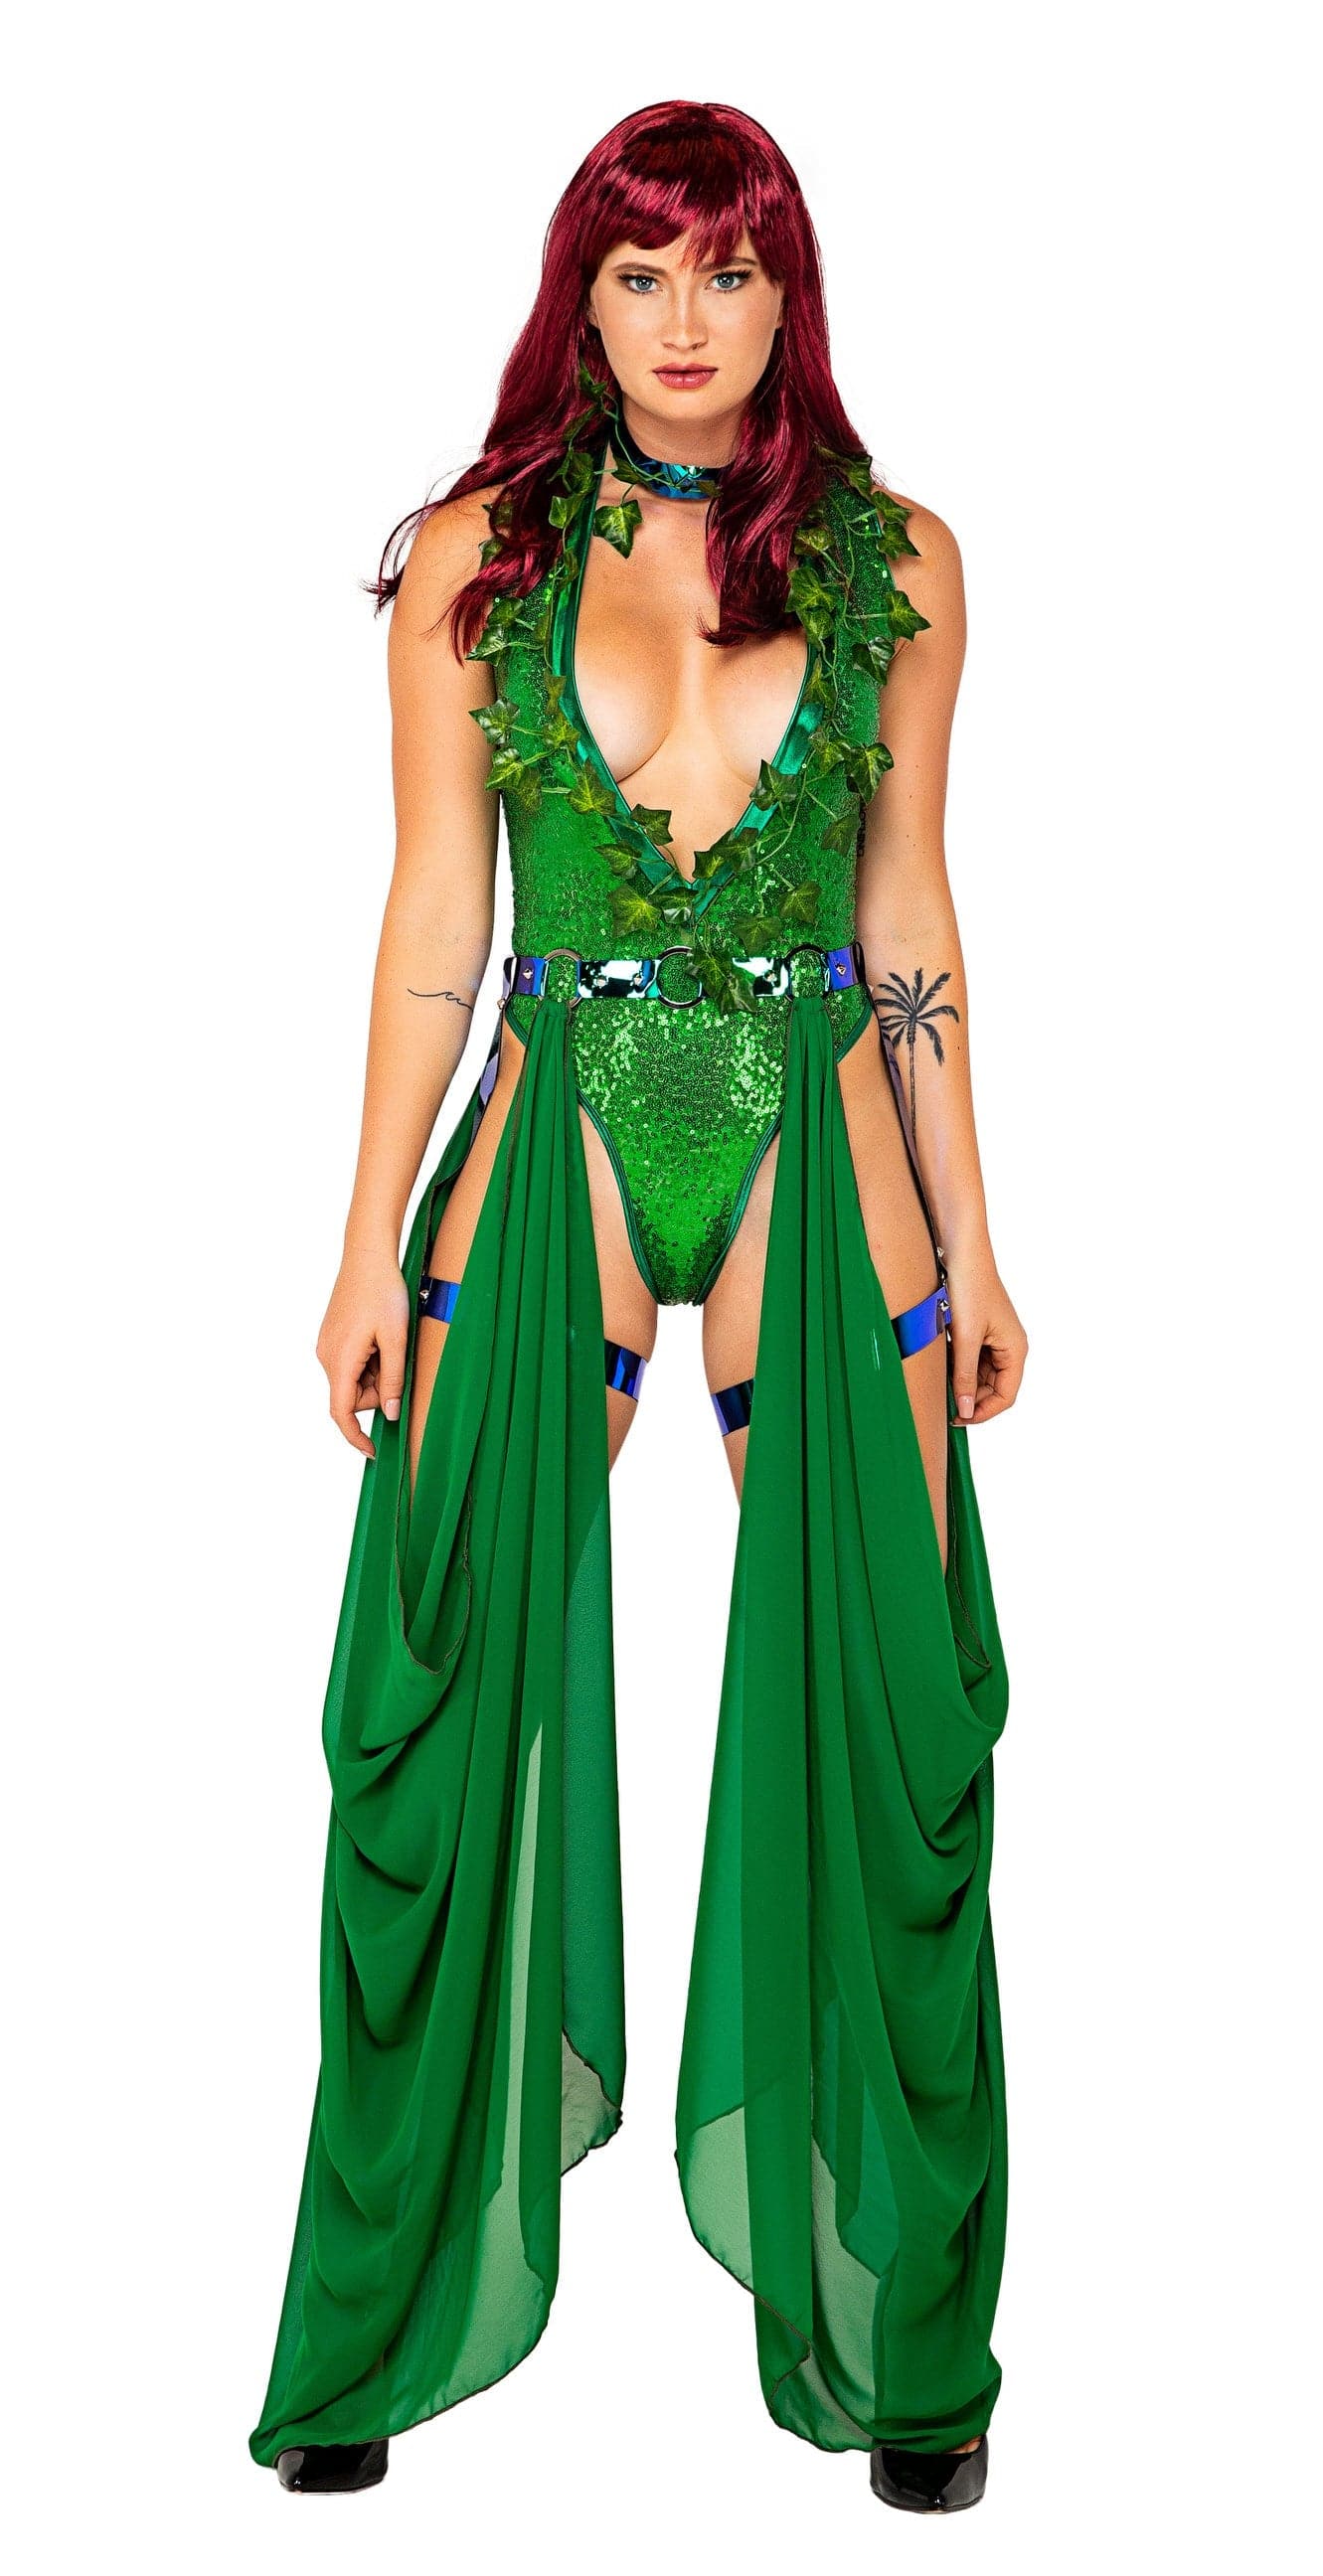 3pc. Poisonous Kiss Poison Ivy Women's Costume - For Love of Lingerie